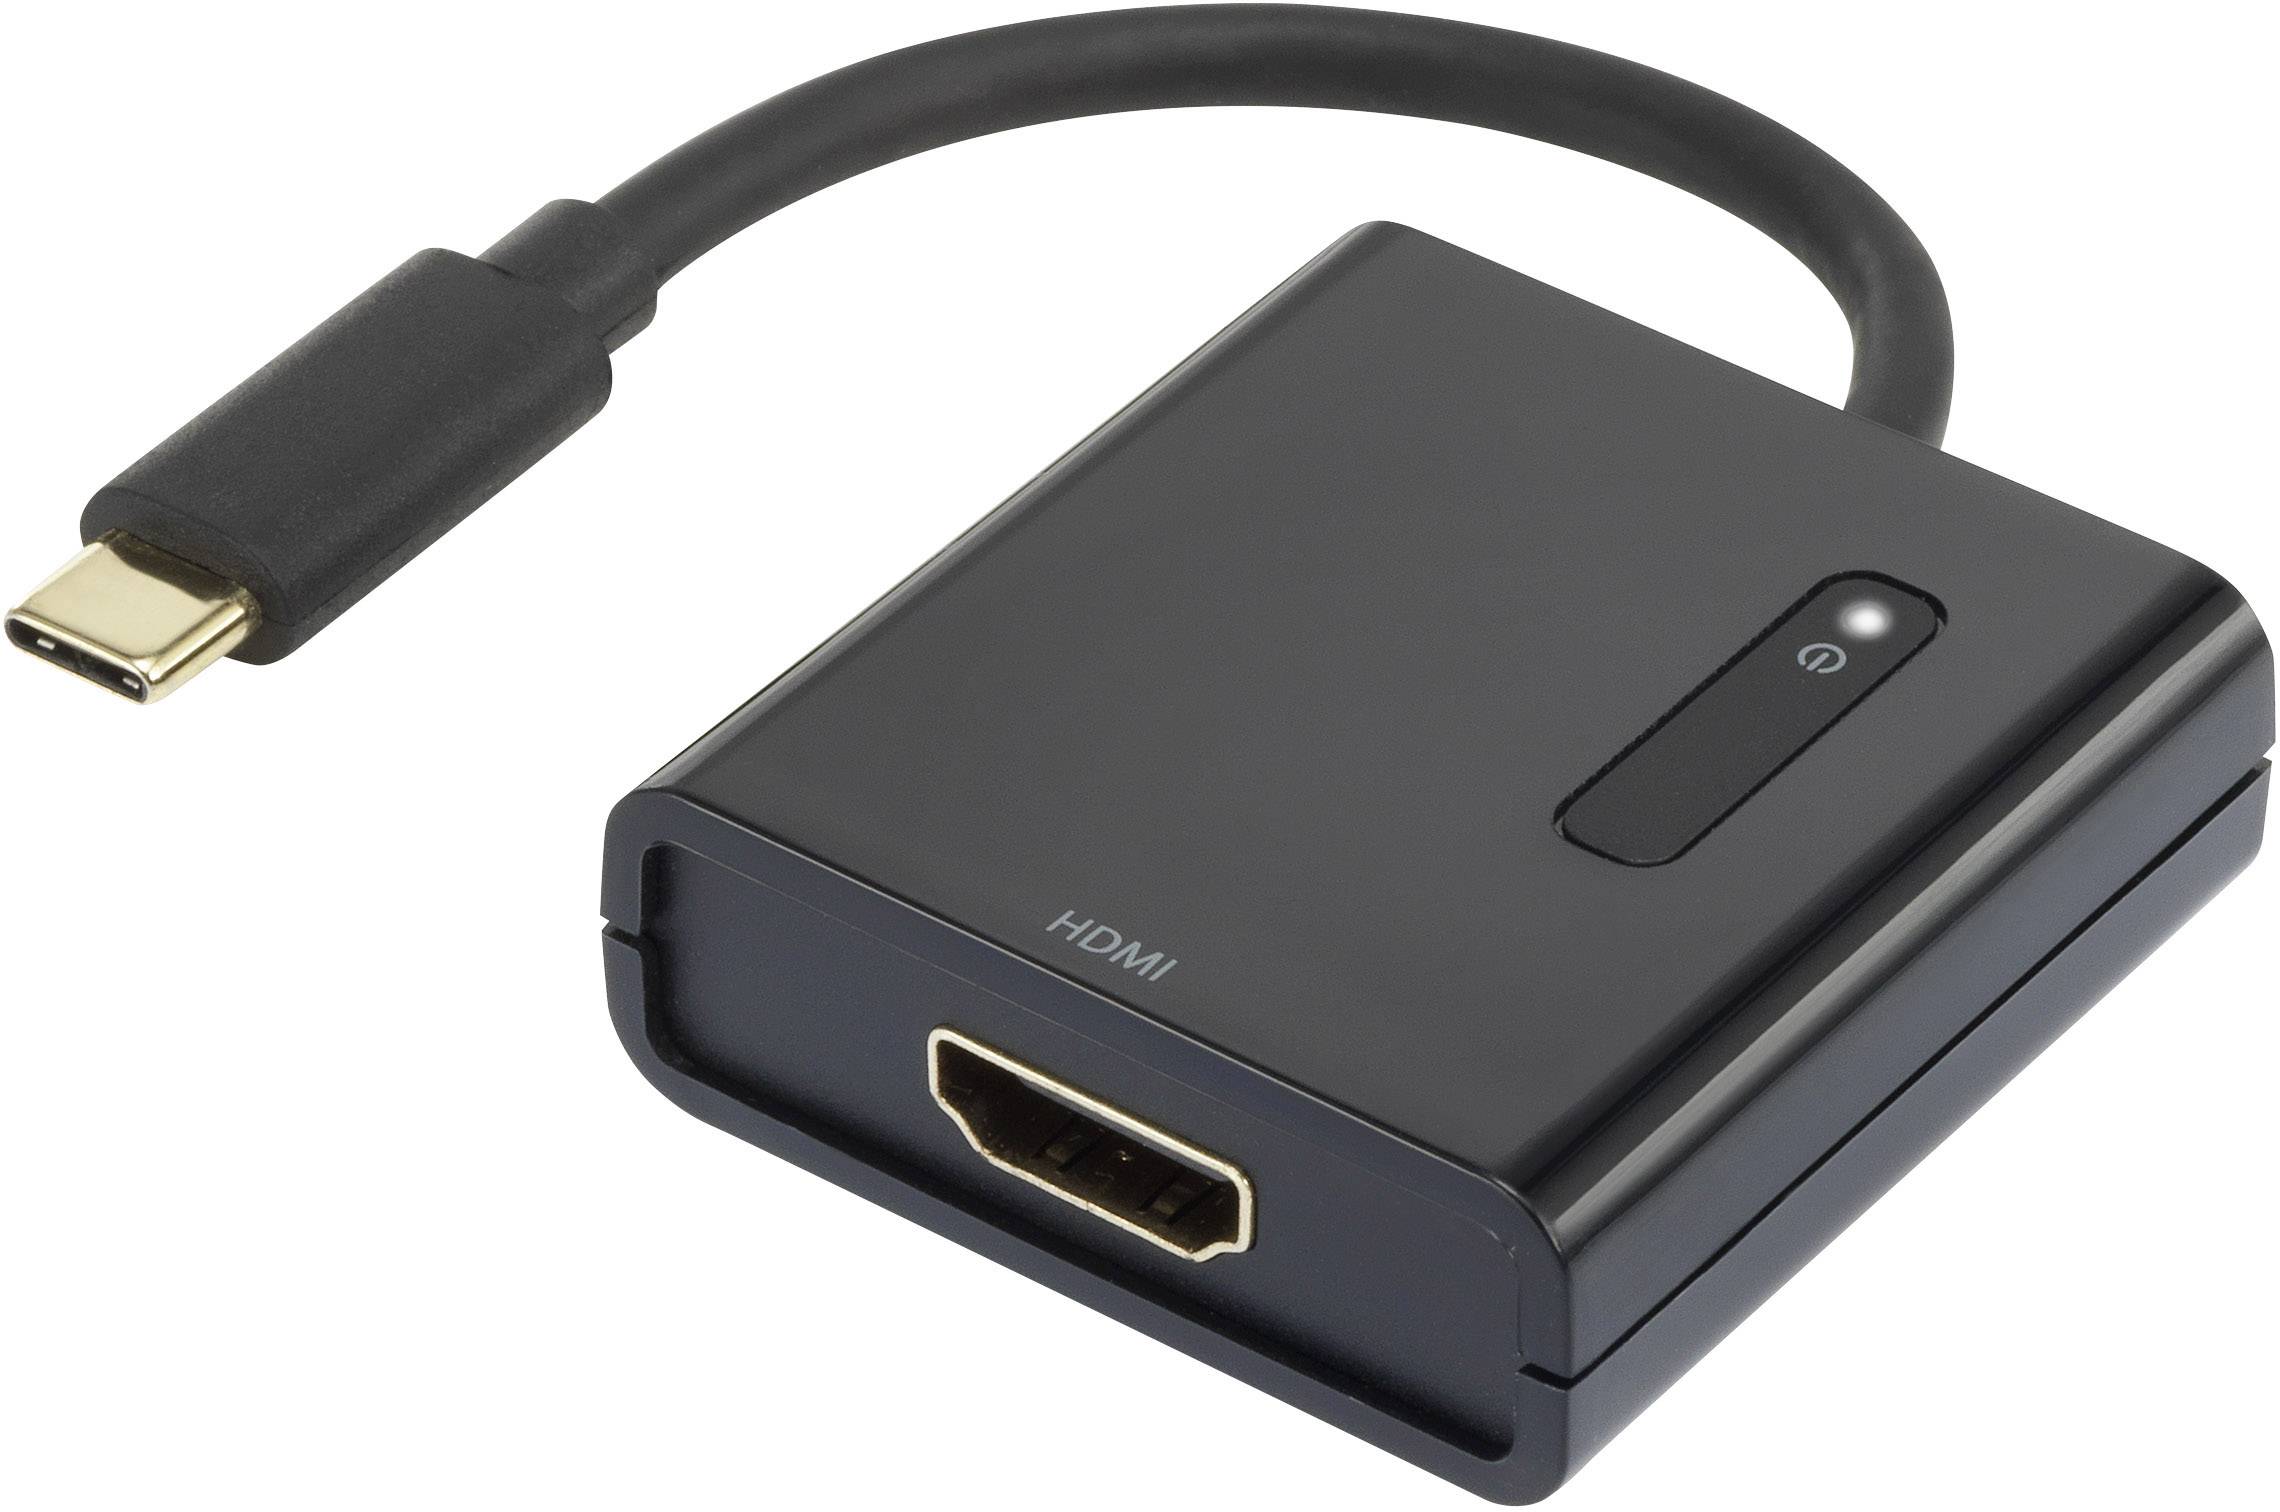 A usb to hdmi converter box - lioalive